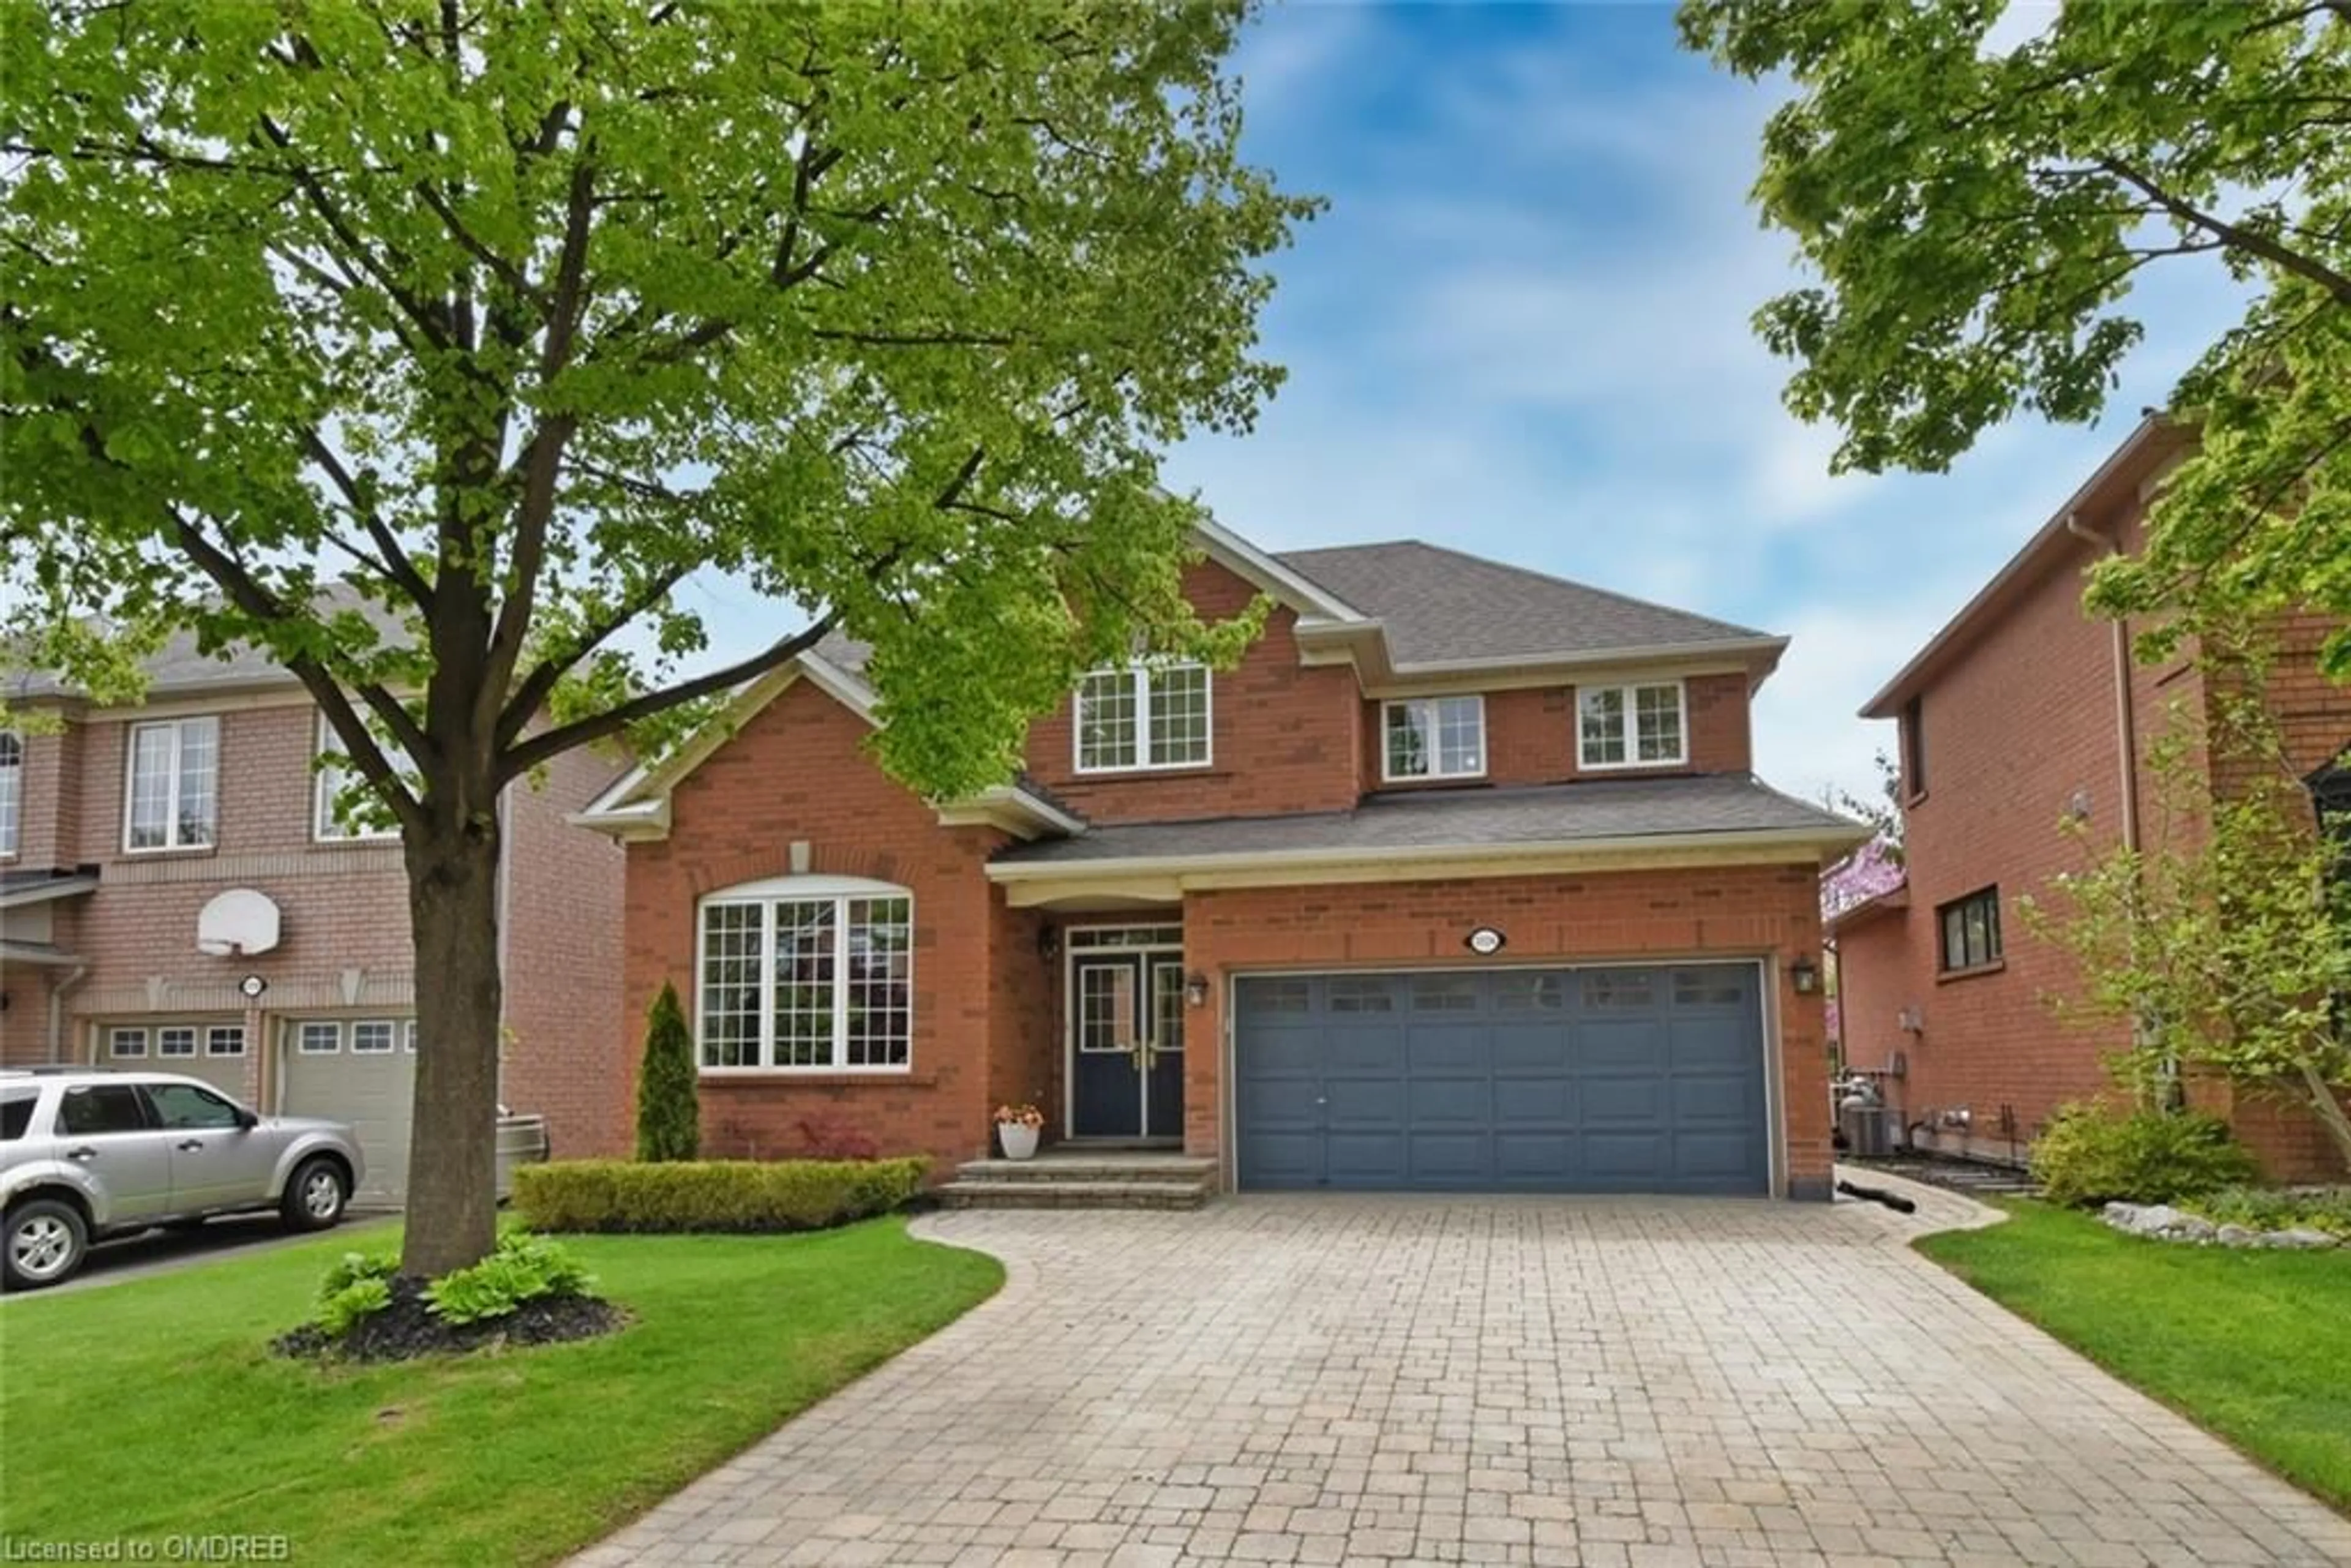 Home with brick exterior material for 2224 Kingsmill Cres, Oakville Ontario L6M 3X8